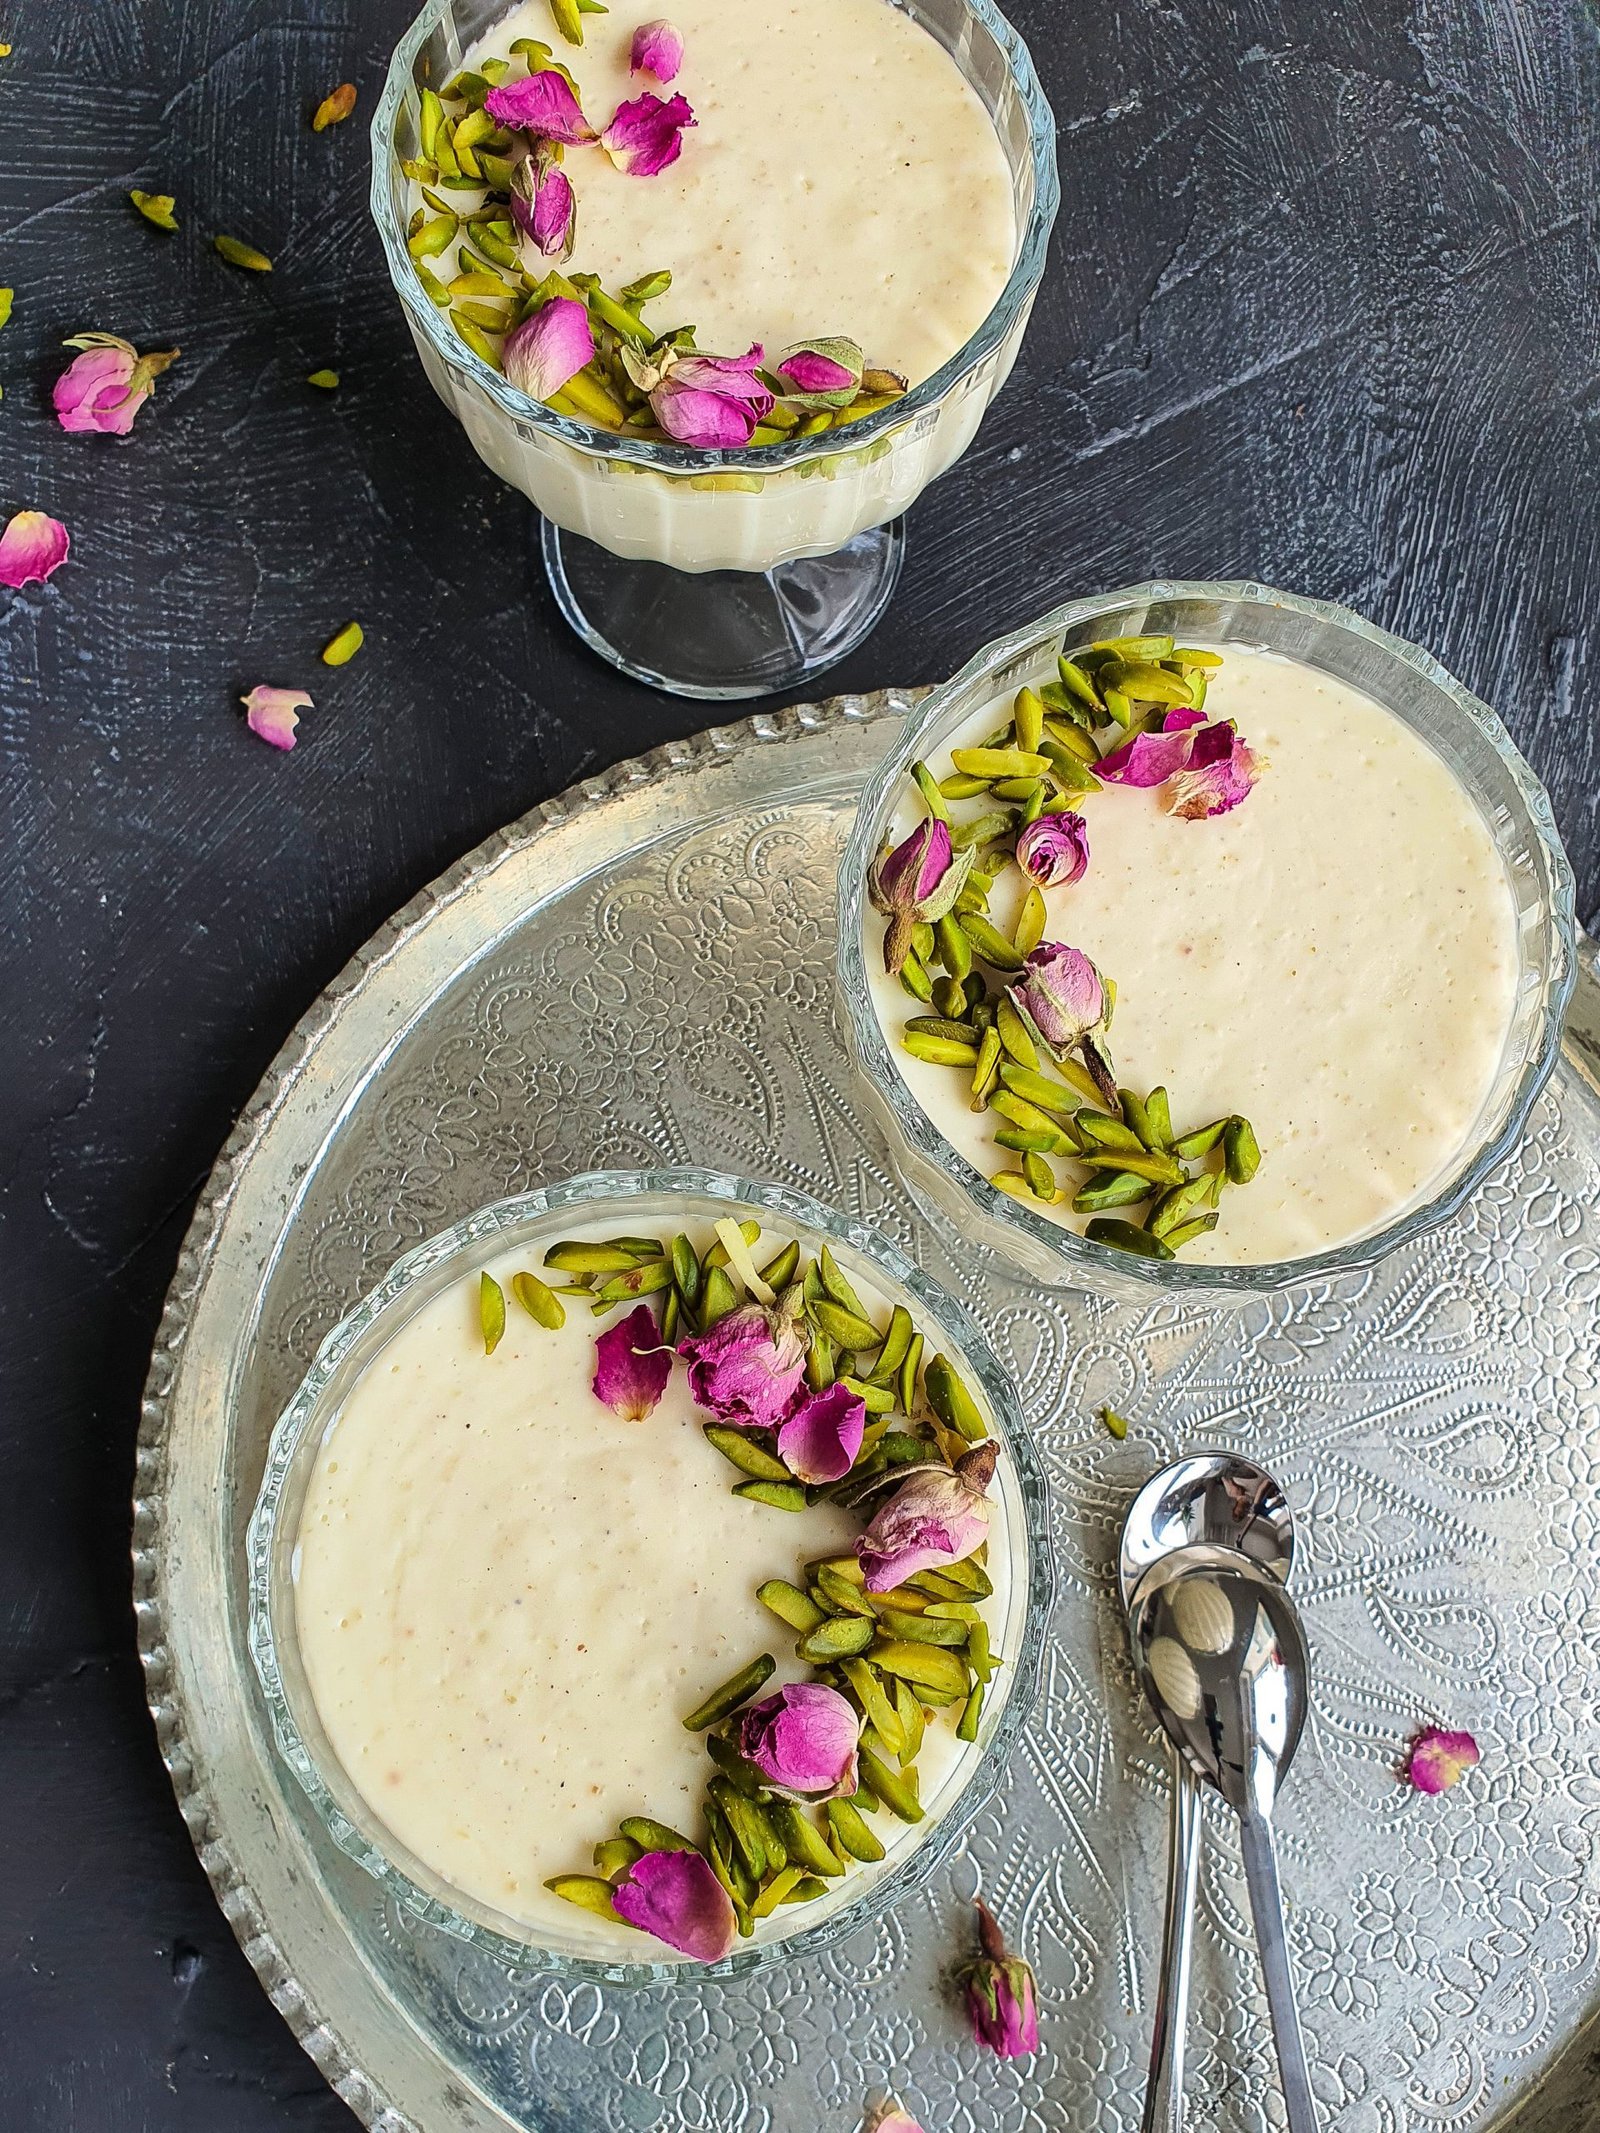 A bowl of creamy Muhallebi (Muhalabia) Middle Eastern Milk Pudding with a sprinkle of green pistachios and pink rose petals on top.